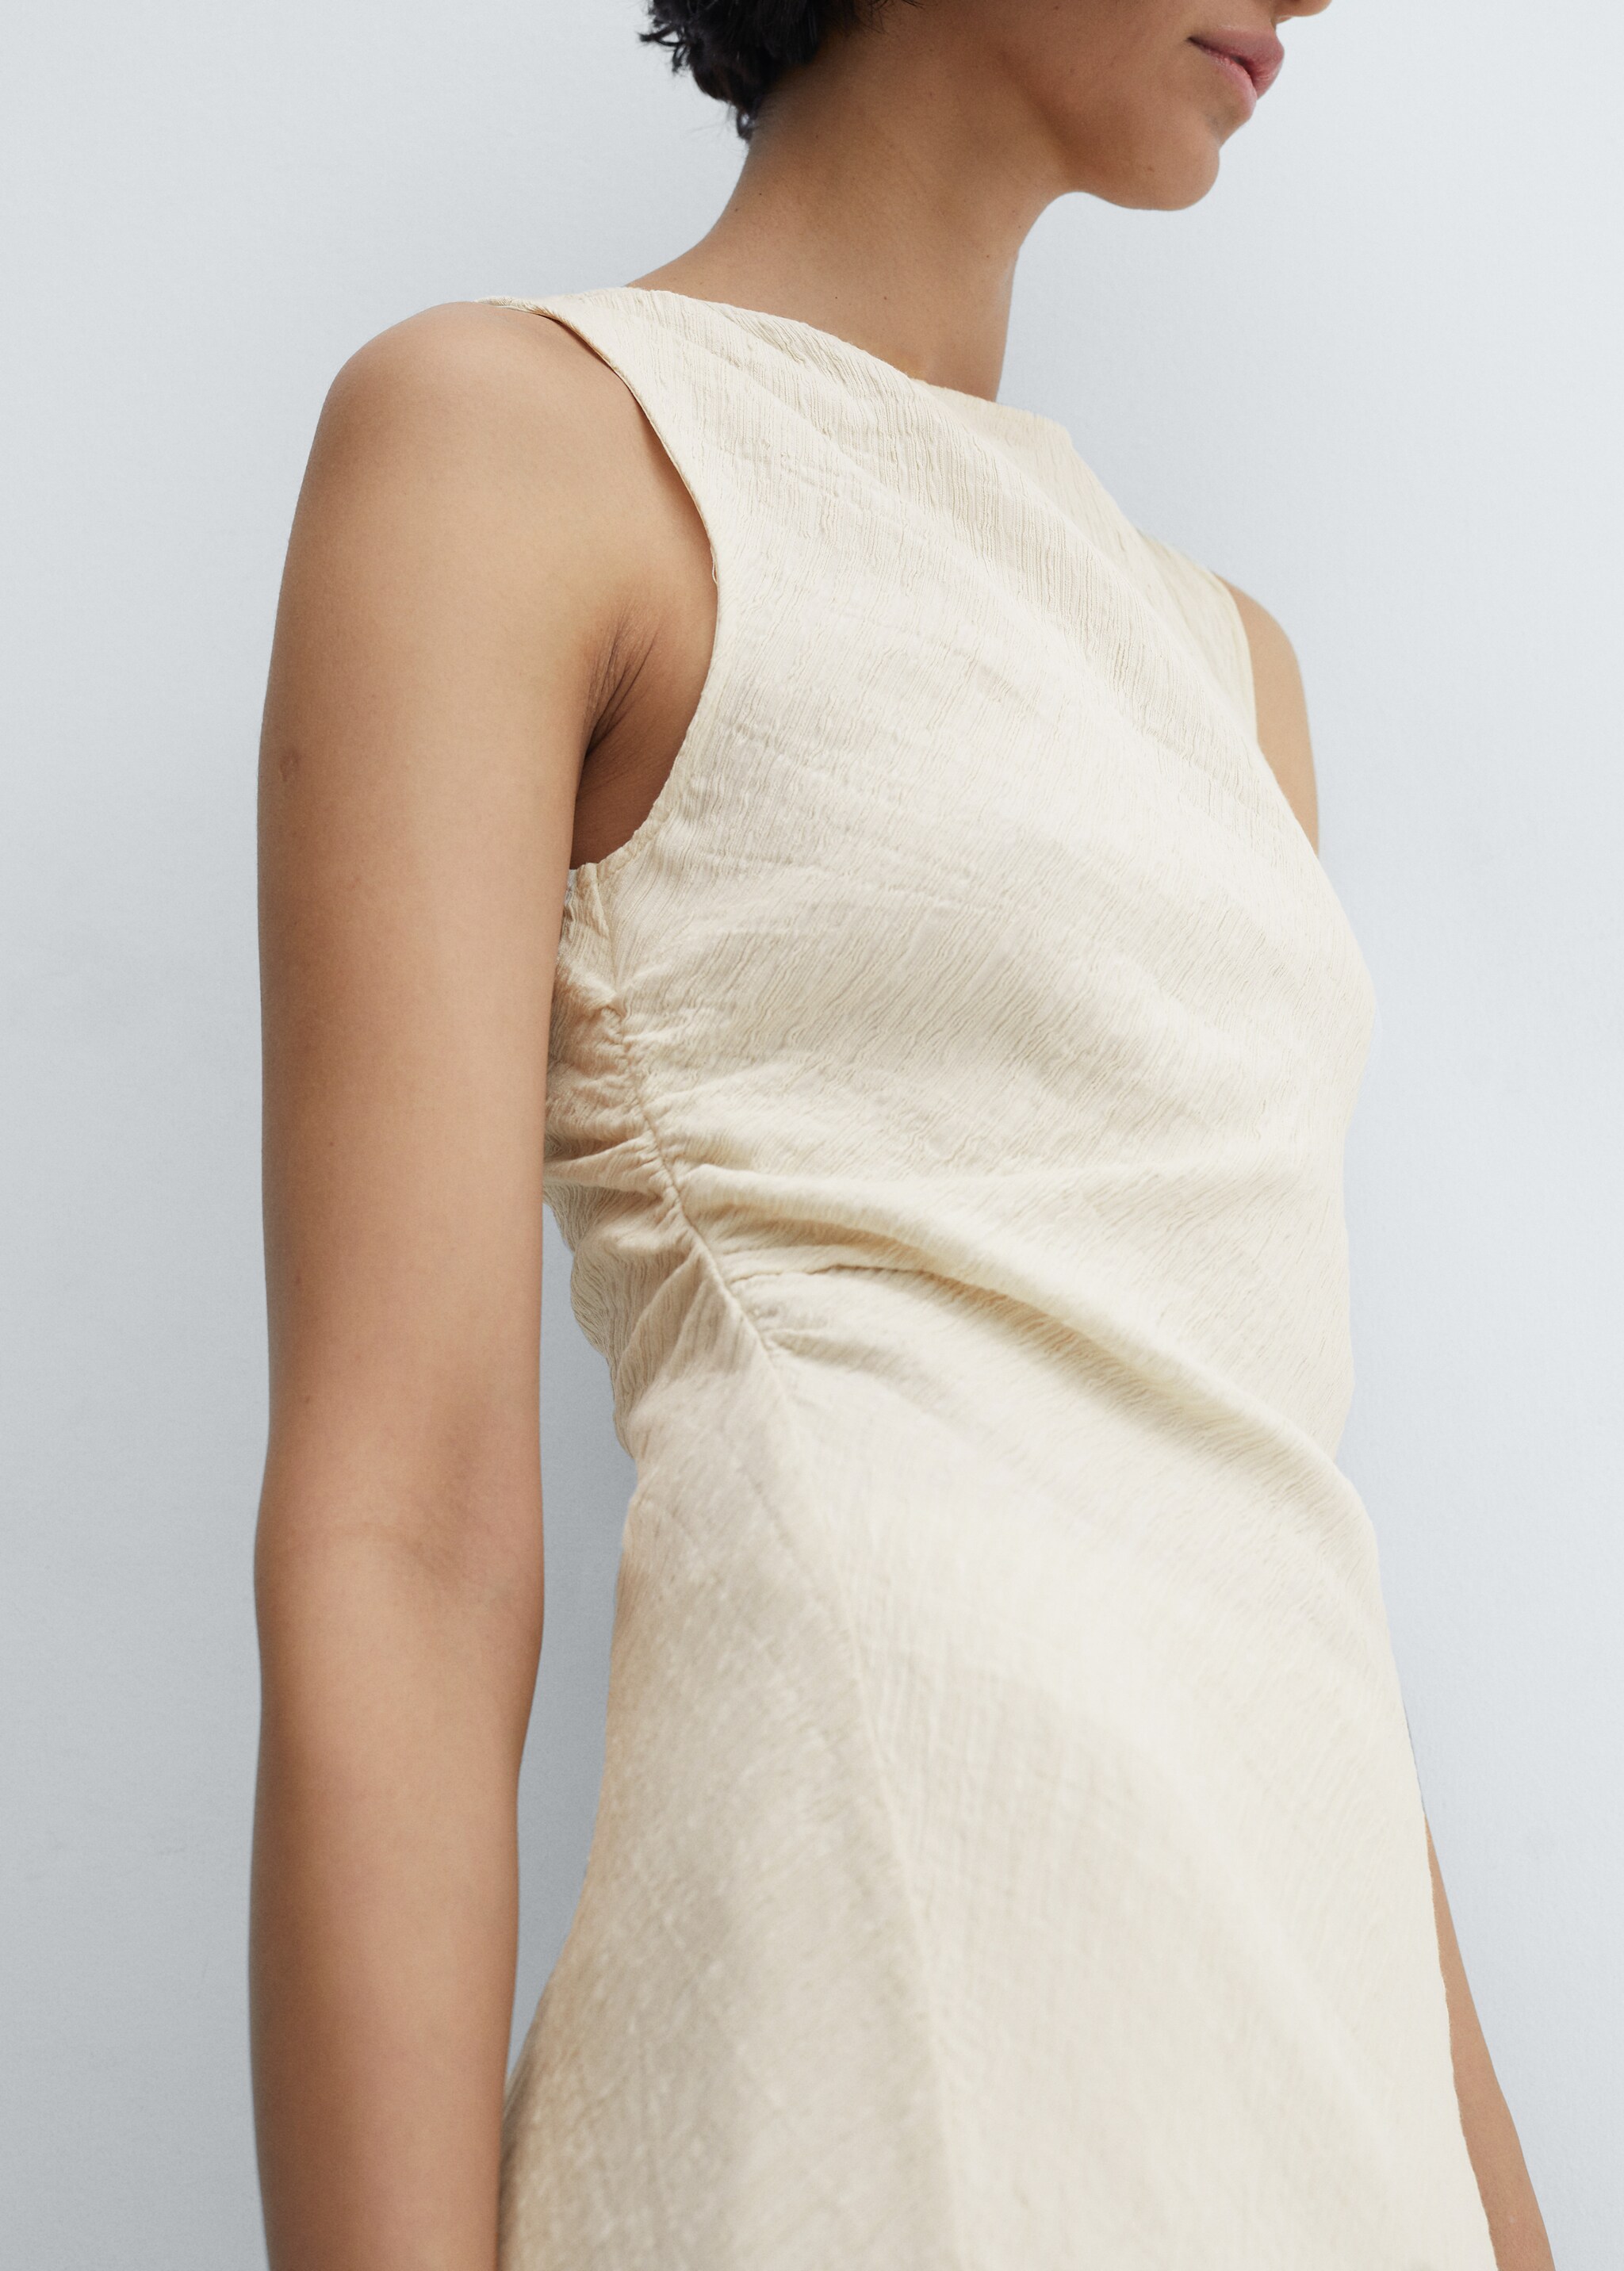 Draped dress with slit - Details of the article 6